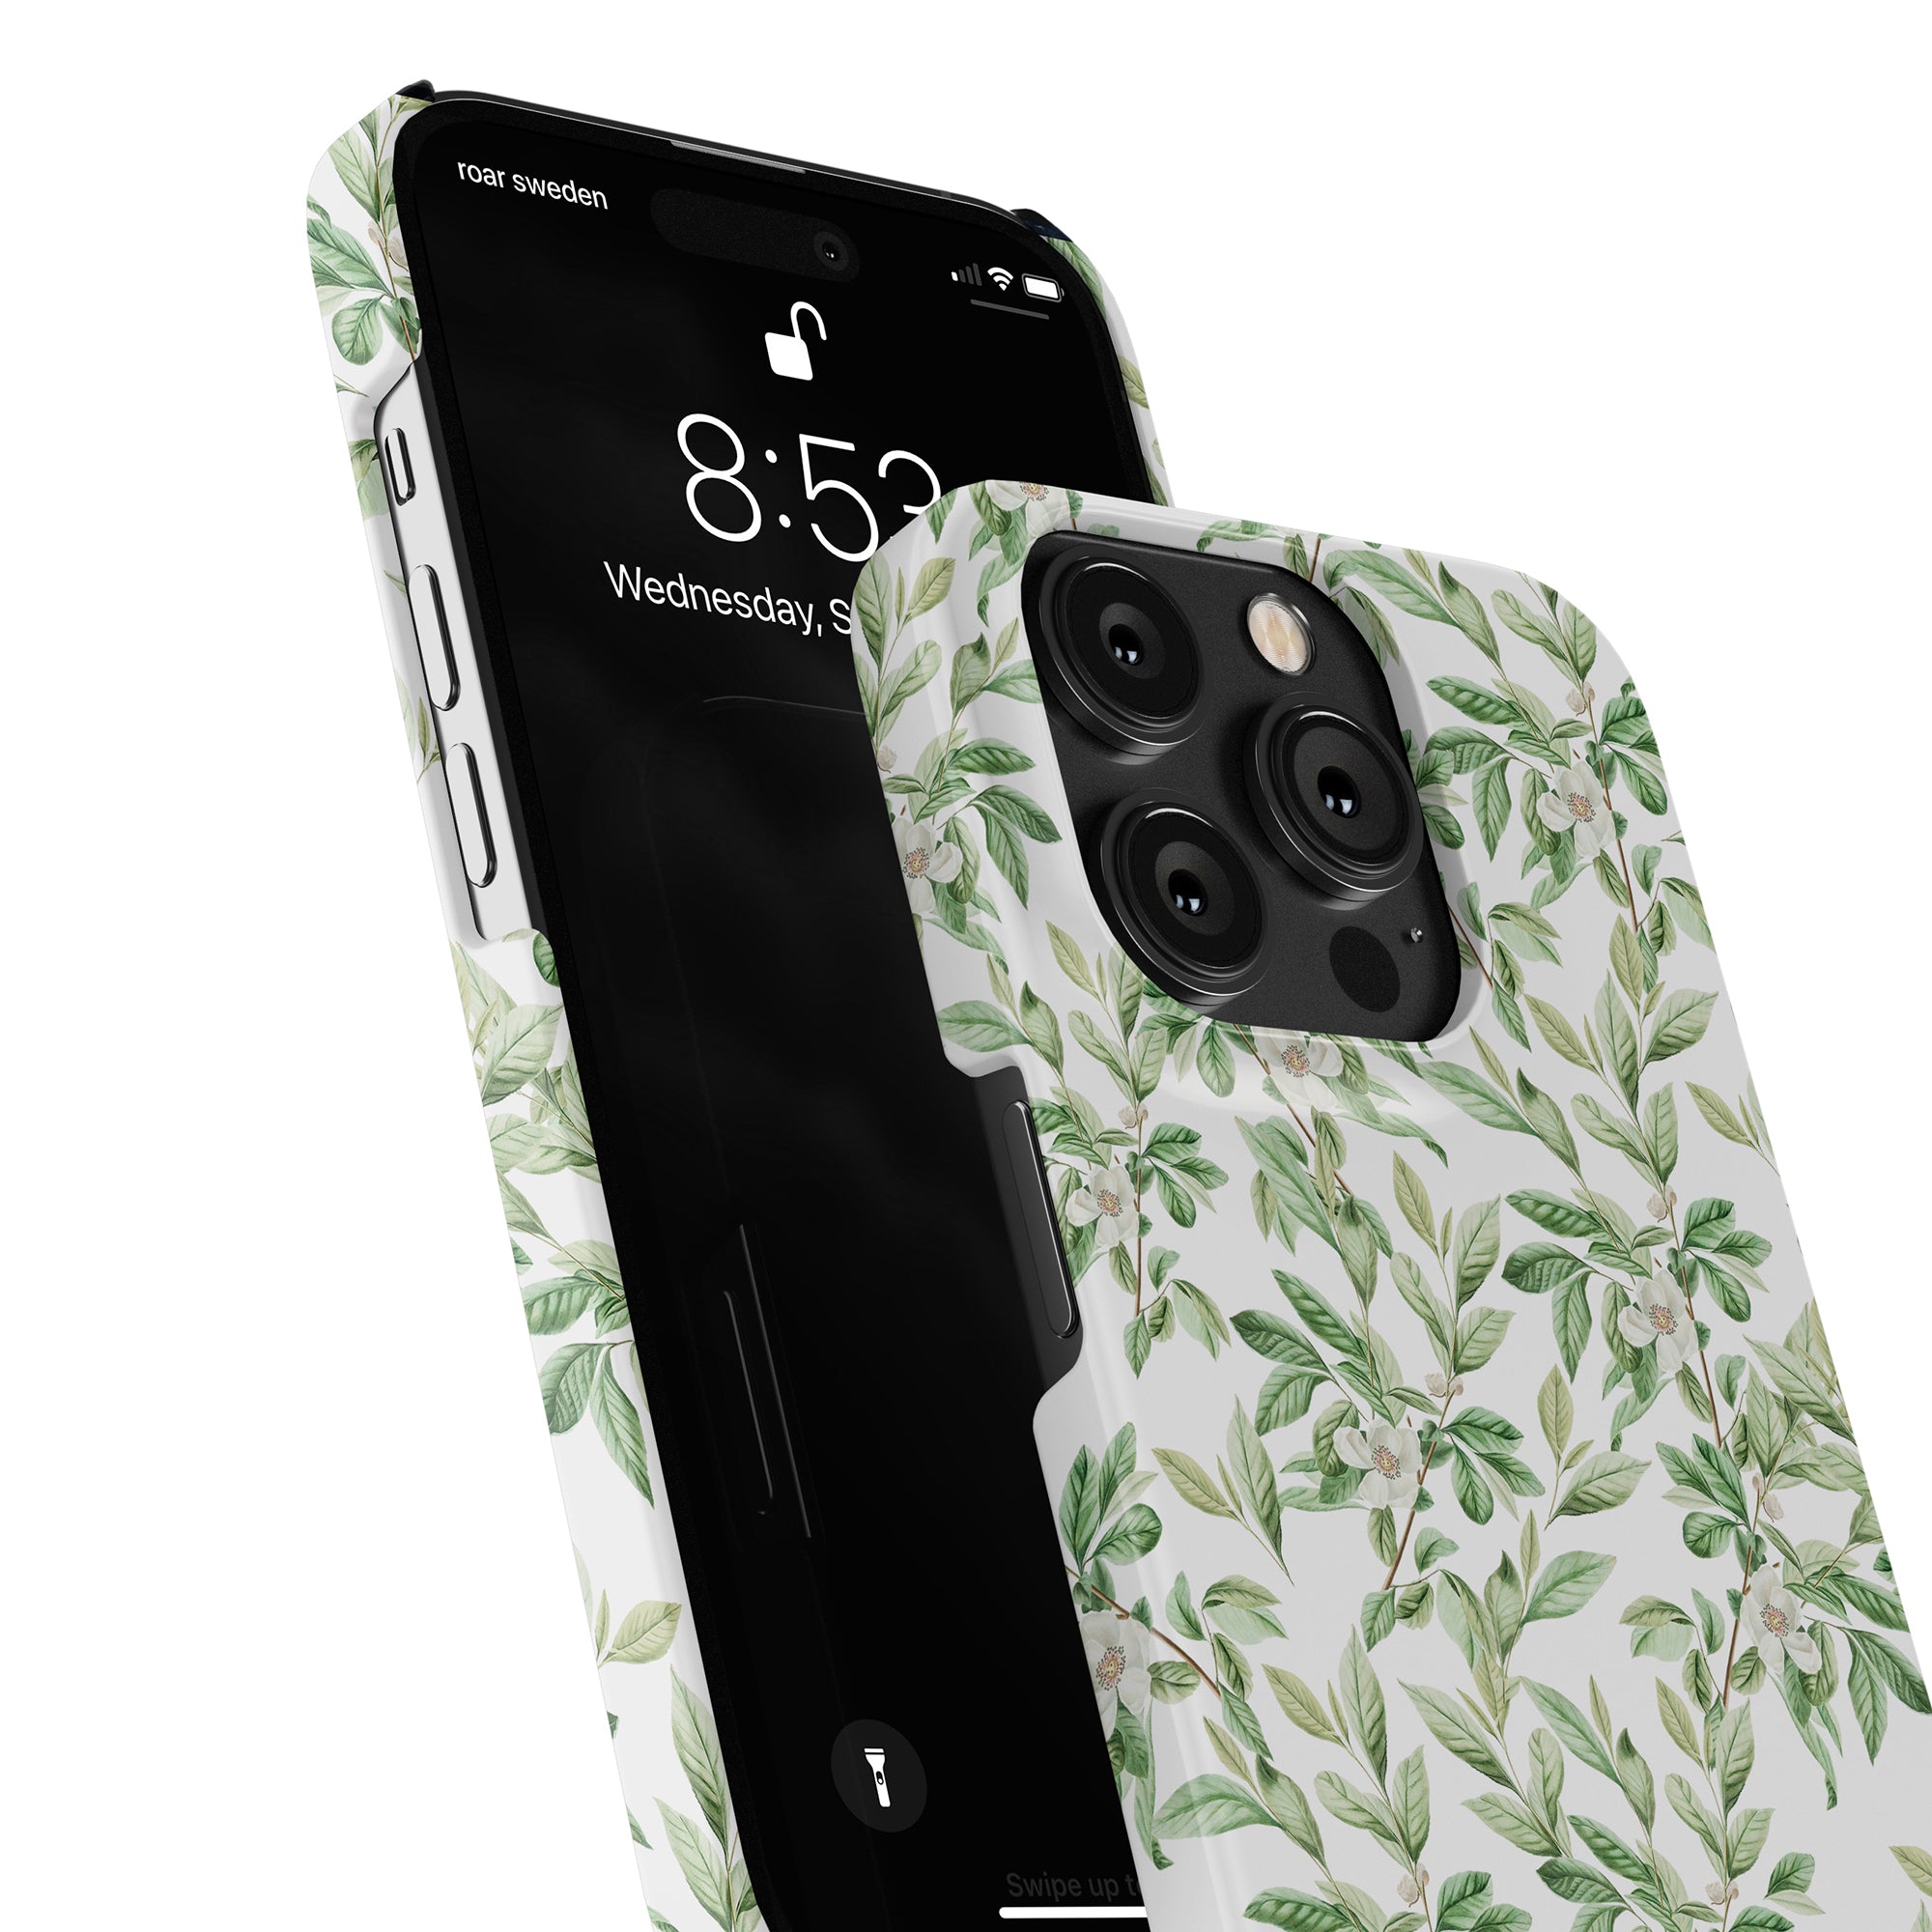 Black smartphone designed with an SEO-optimized Spring Leaves - Slim case, featuring a floral case displaying the lock screen время and a matching floral wallpaper visible through the camera cutout.